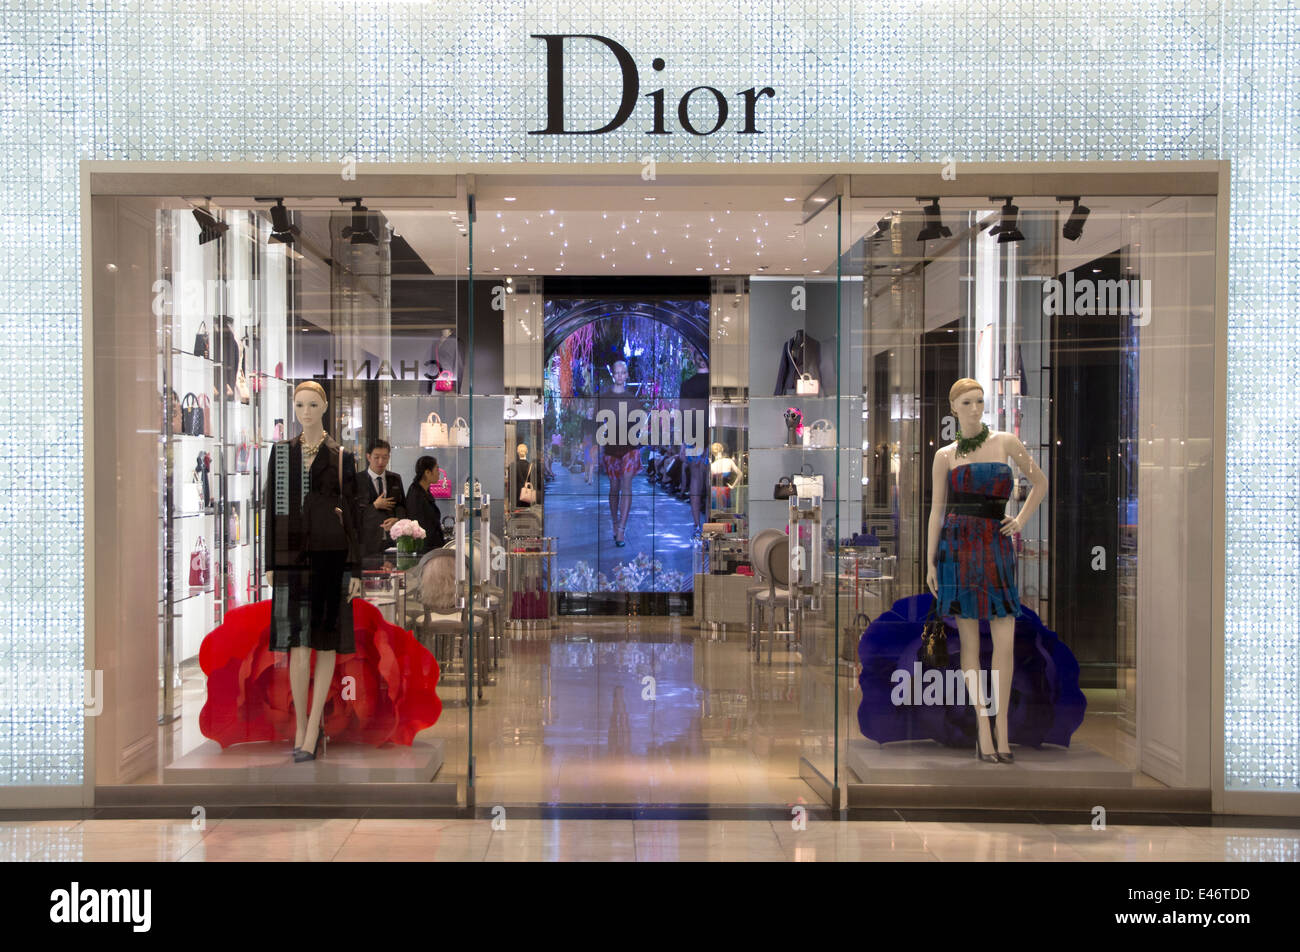 Christian Dior Store High Resolution Stock Photography and Images - Alamy